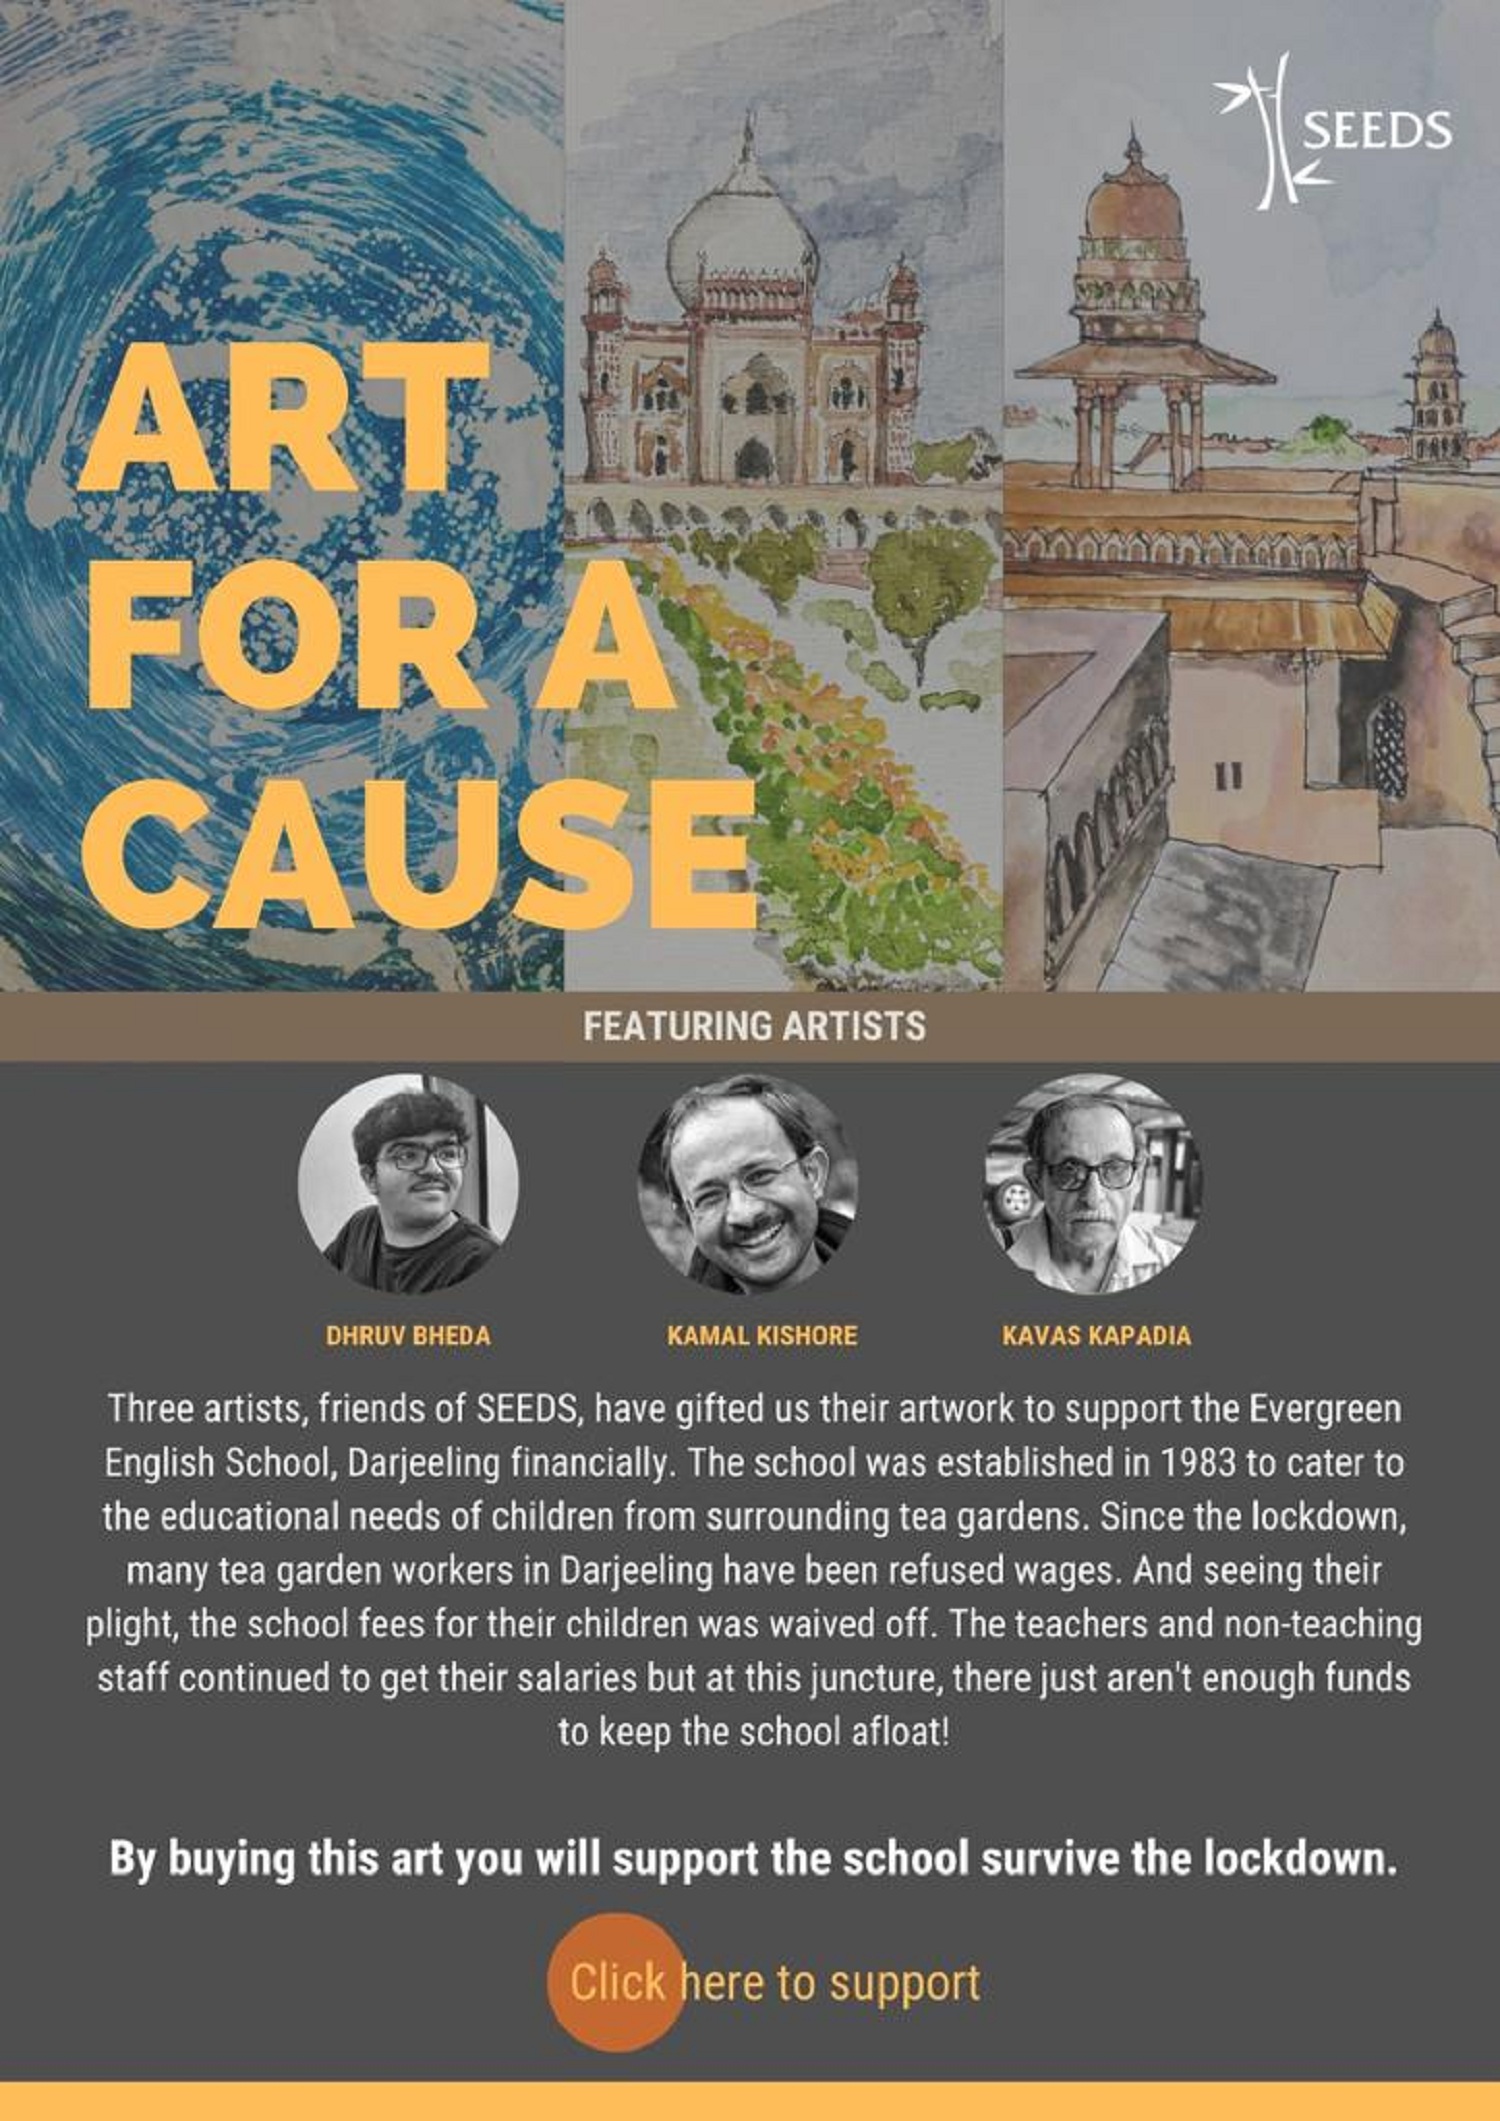 ART FOR CAUSE: SEEDS supports children education through online bidding on paintings, New Delhi, Delhi, India